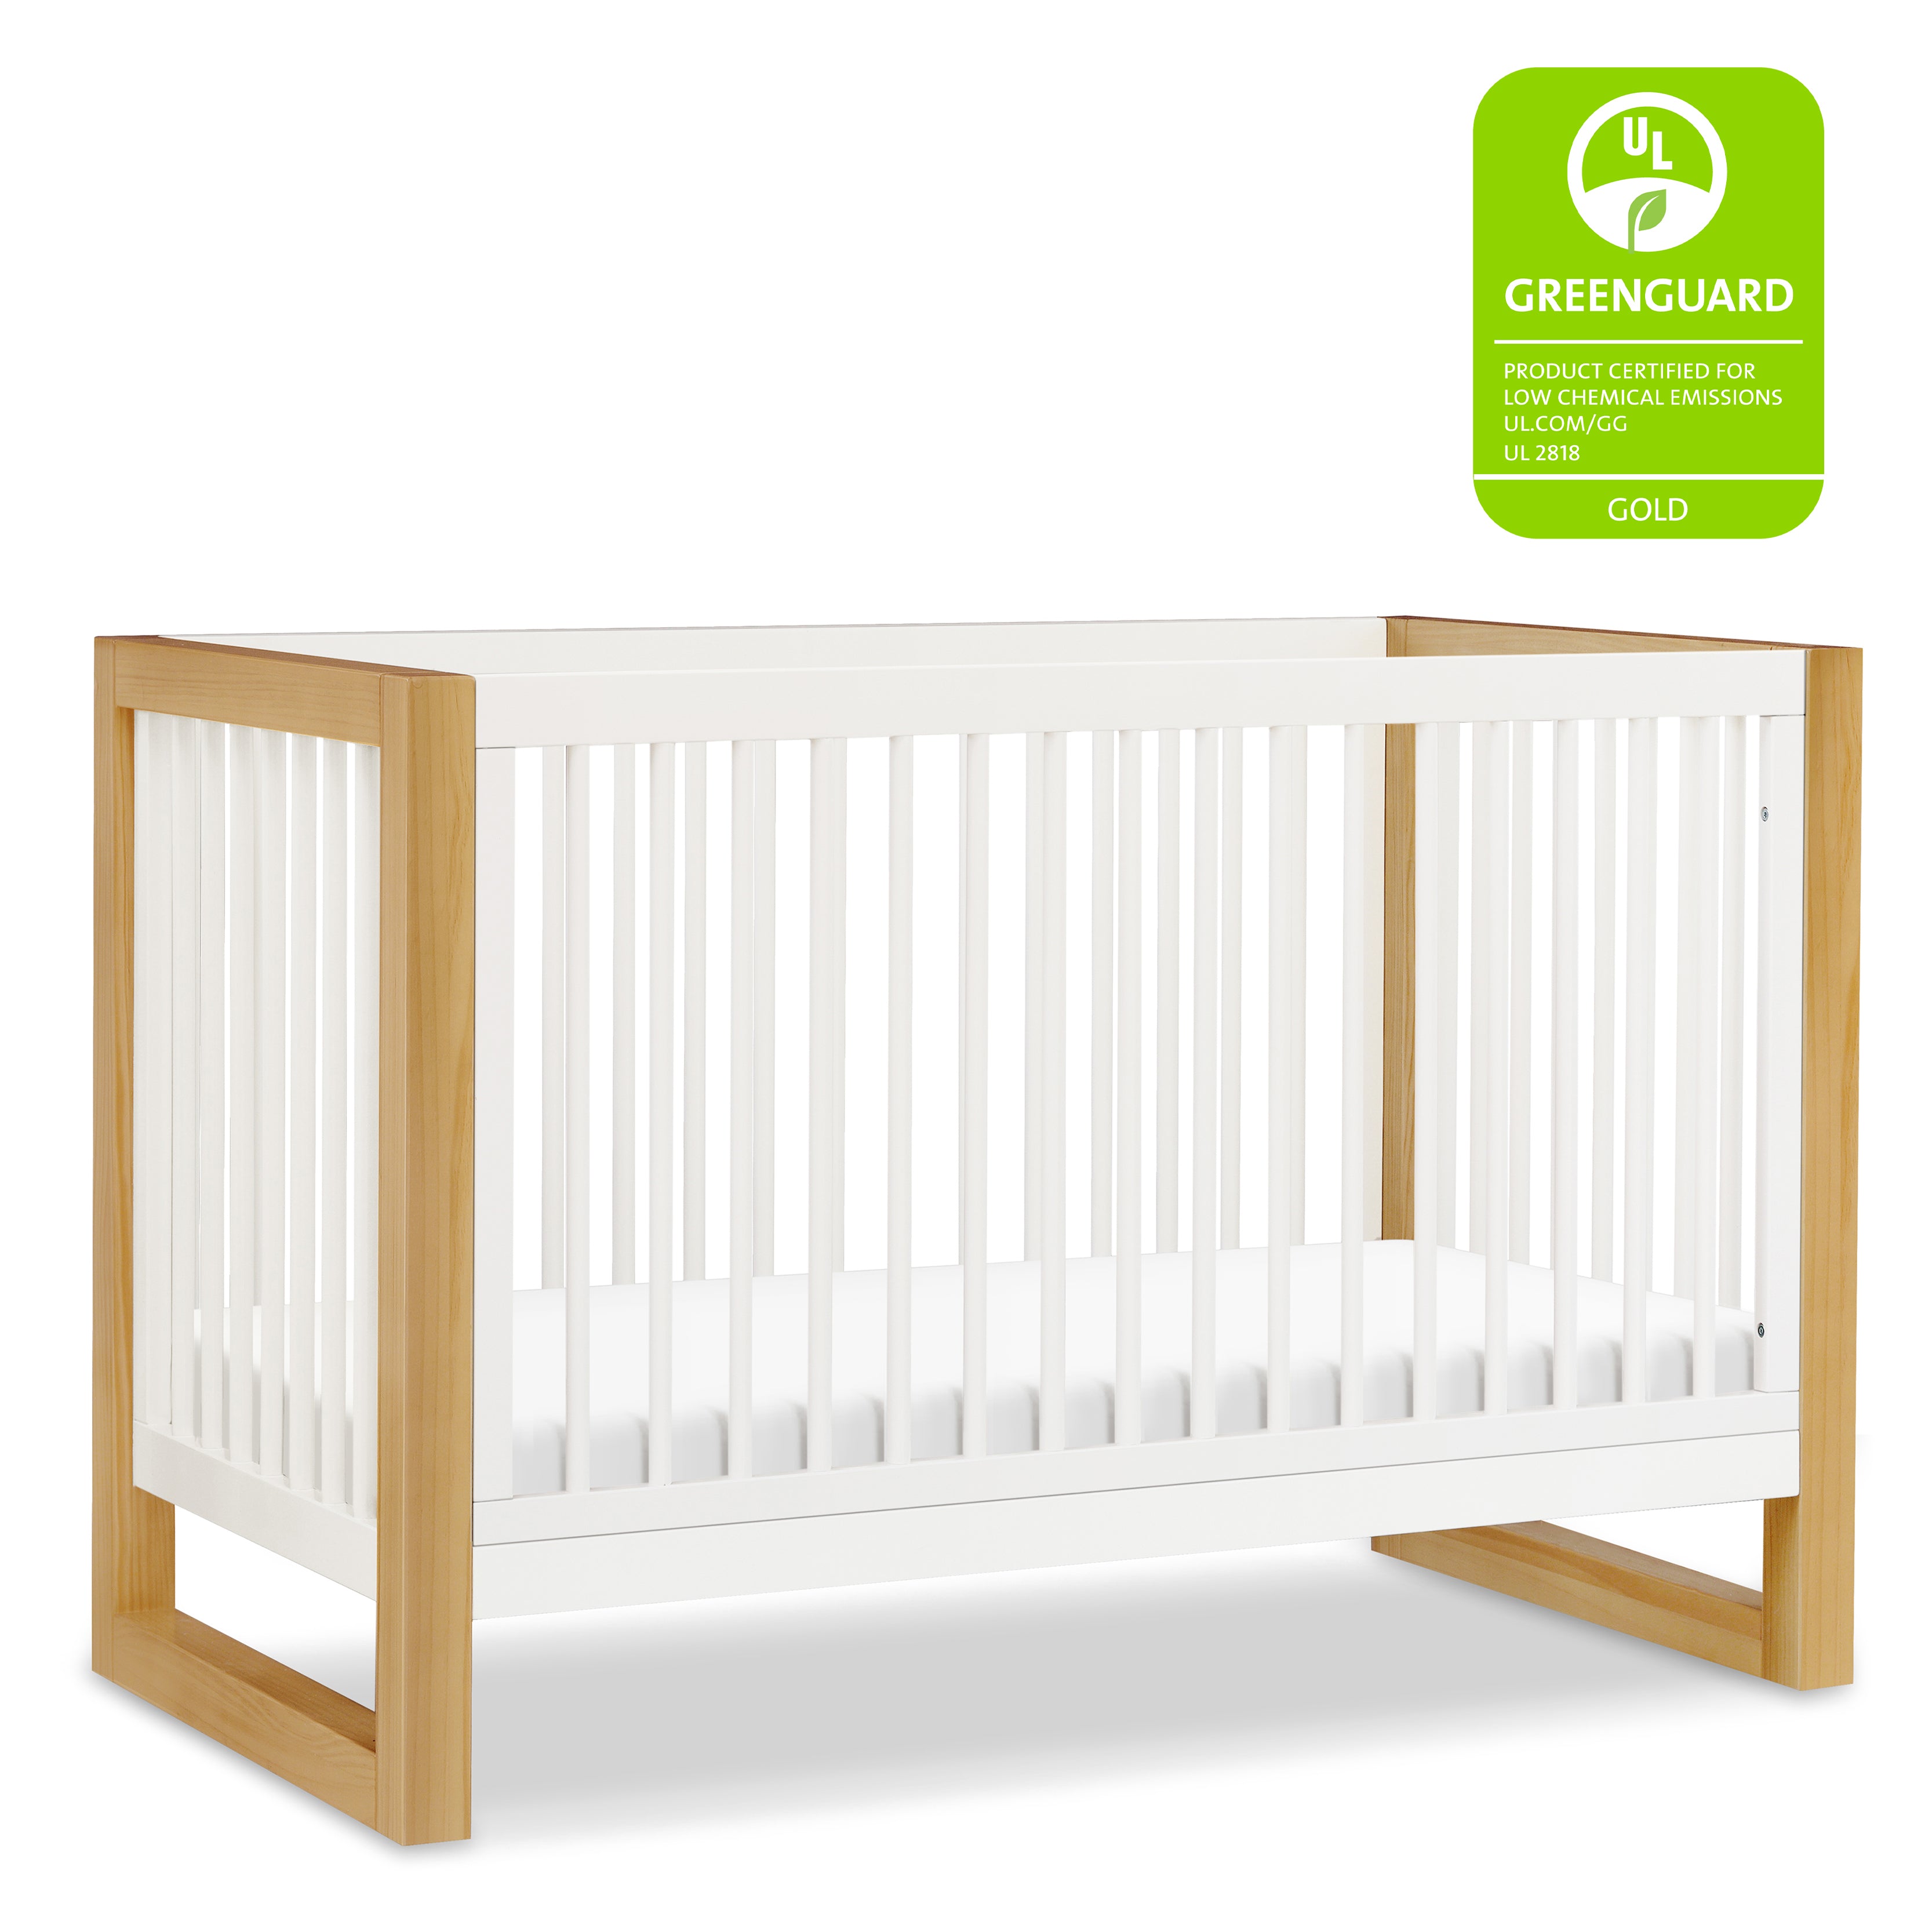 Nantucket 3-in-1 Convertible Crib with Toddler Bed Conversion Kit - Warm White & Honey - Twinkle Twinkle Little One